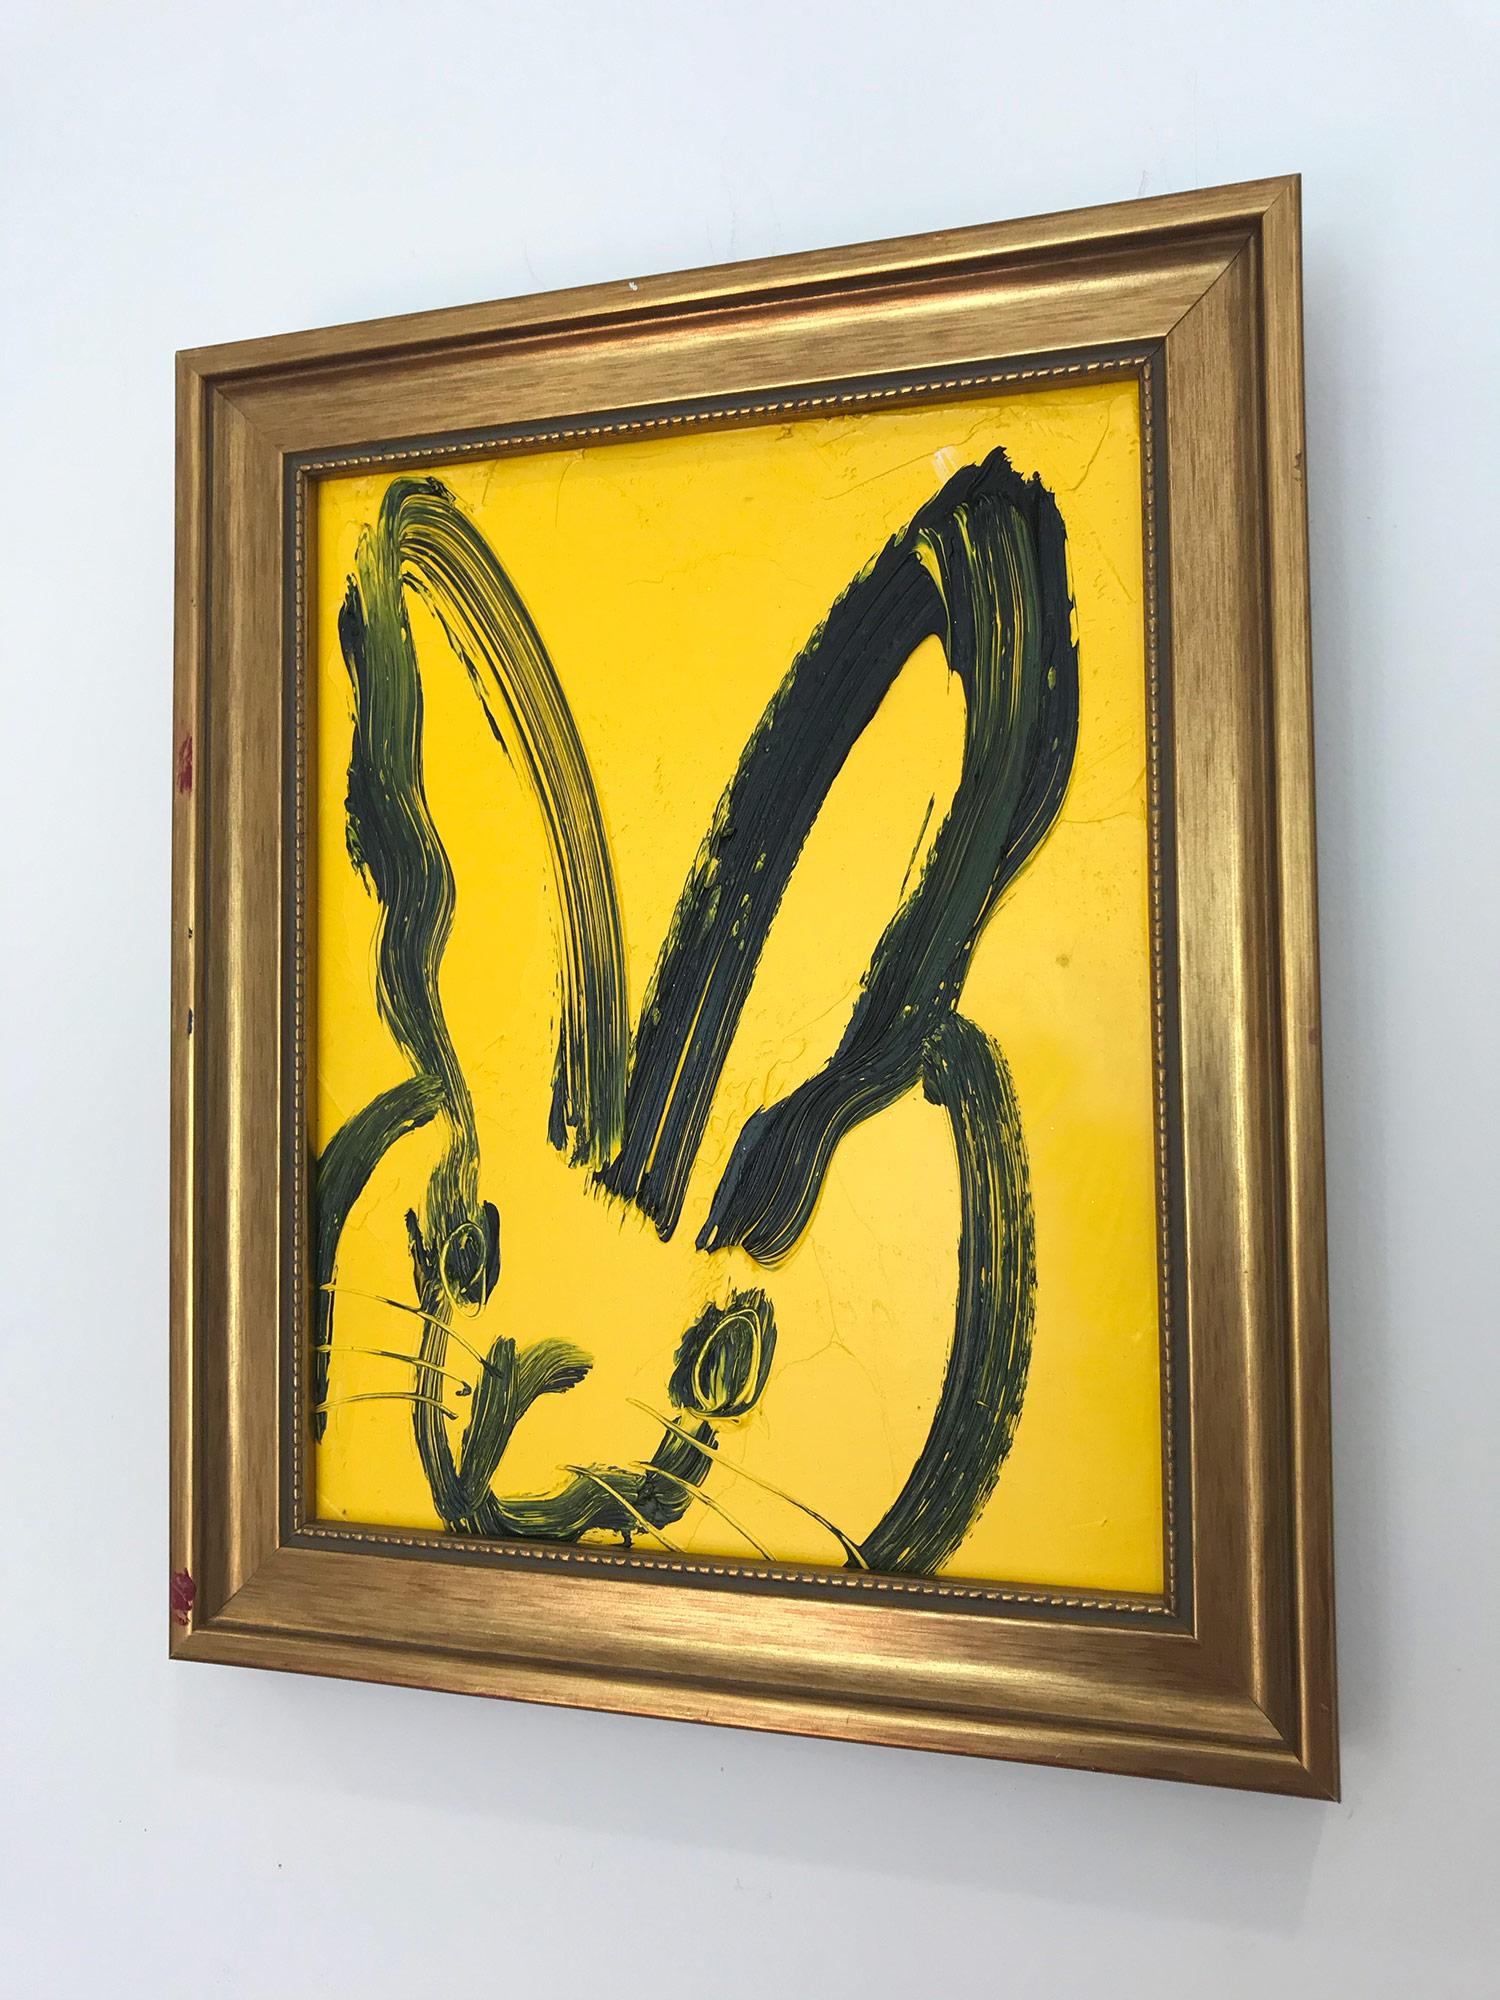 A wonderful composition of one of Slonem's most iconic subjects, Bunnies. This piece depicts a gestural figure of a black bunny on a yellow background with thick use of paint. It is housed in a wonderful antique frame. Inspired by nature and a